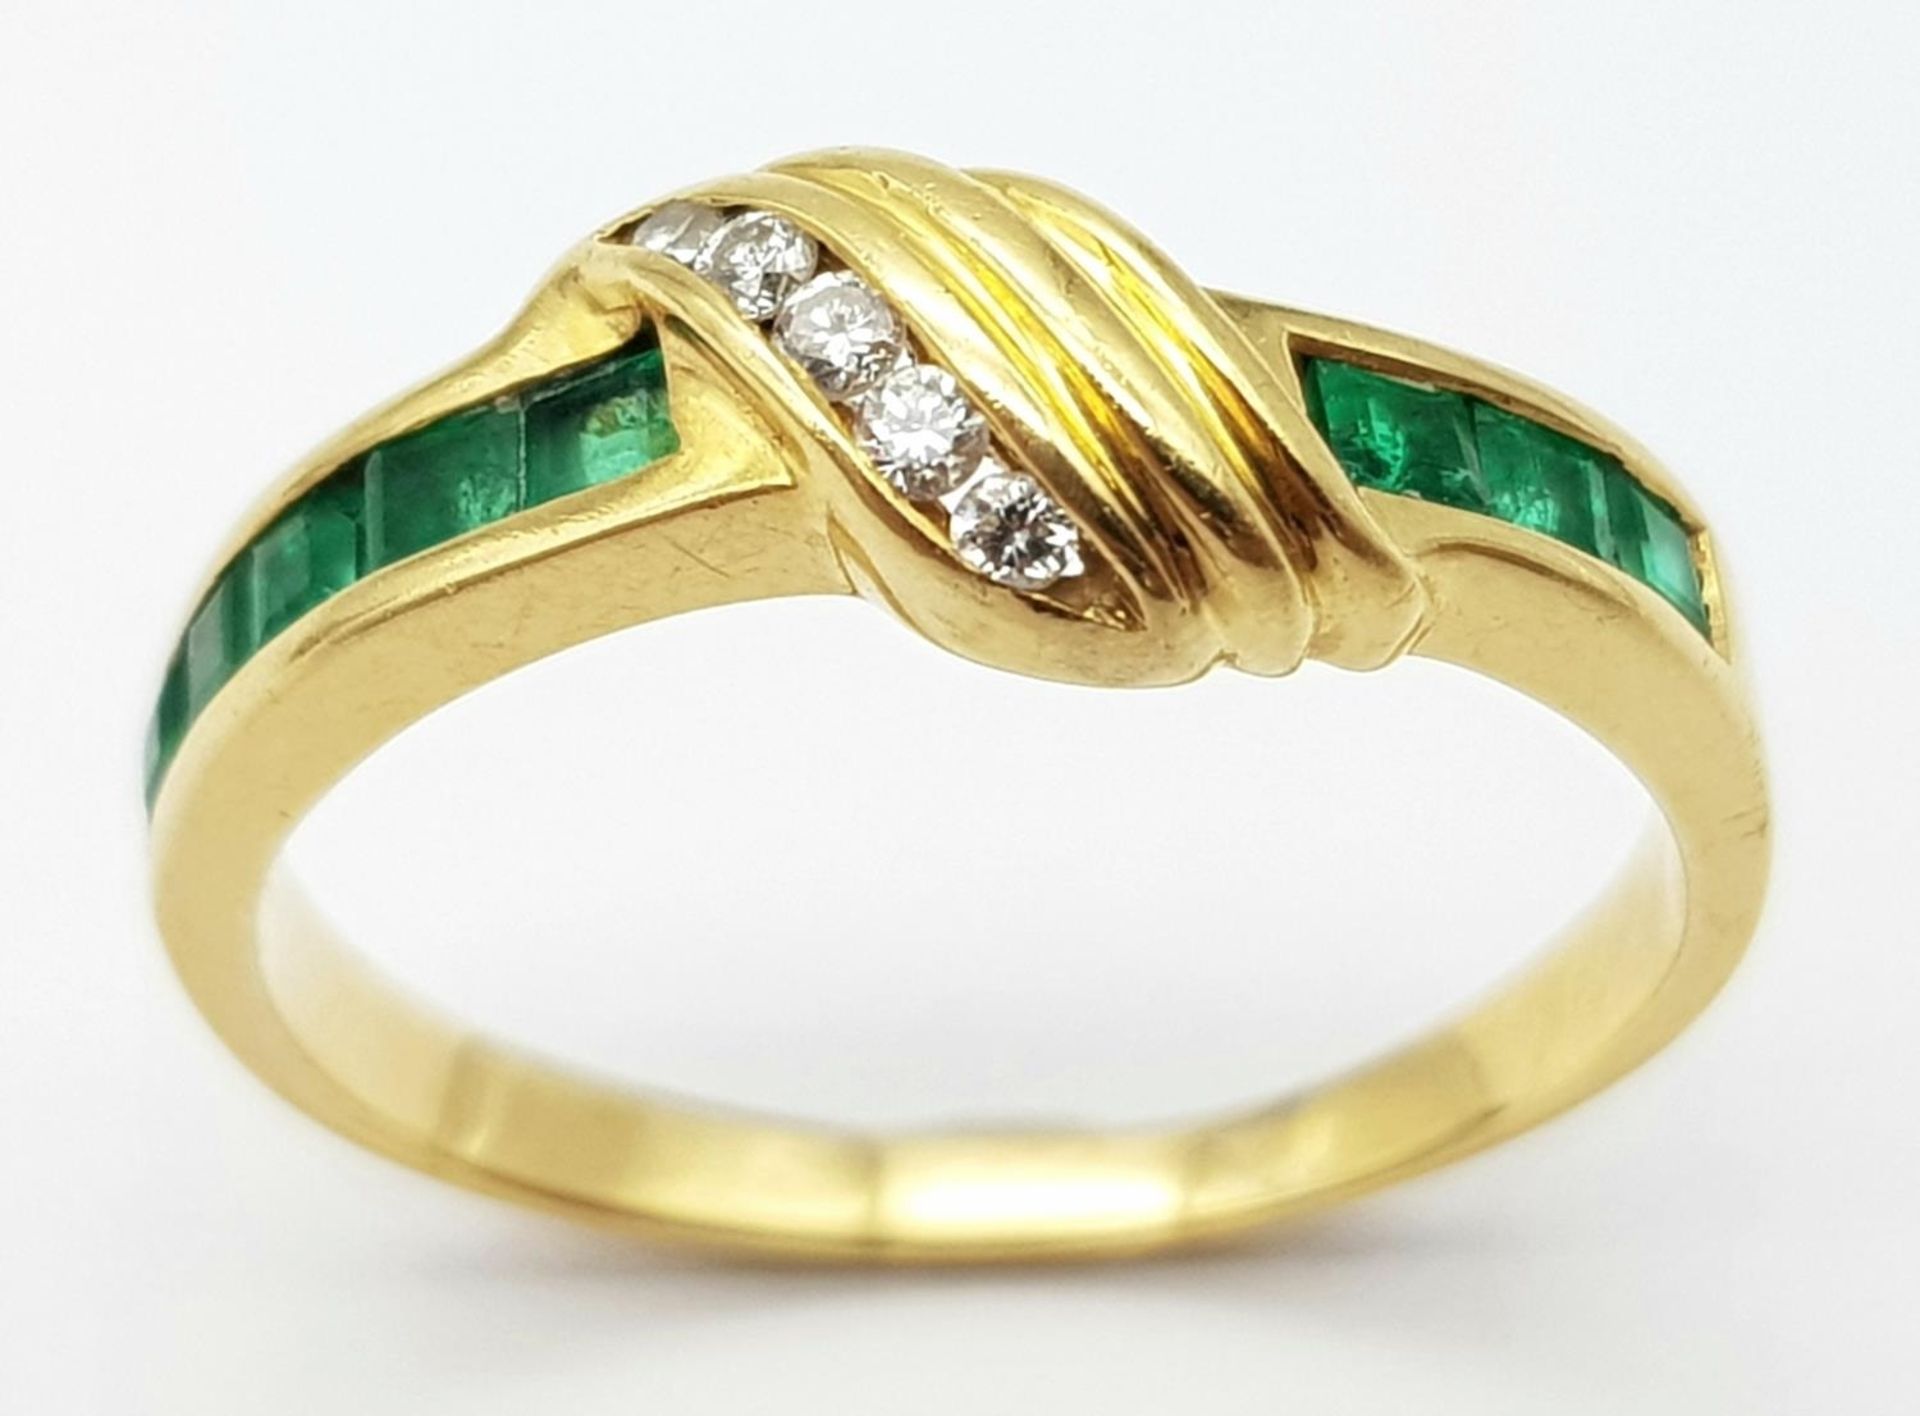 AN 18K YELLOW GOLD DIAMOND & EMERALD RING. Size J, 2.3g total weight. Ref: SC 9052 - Image 2 of 6